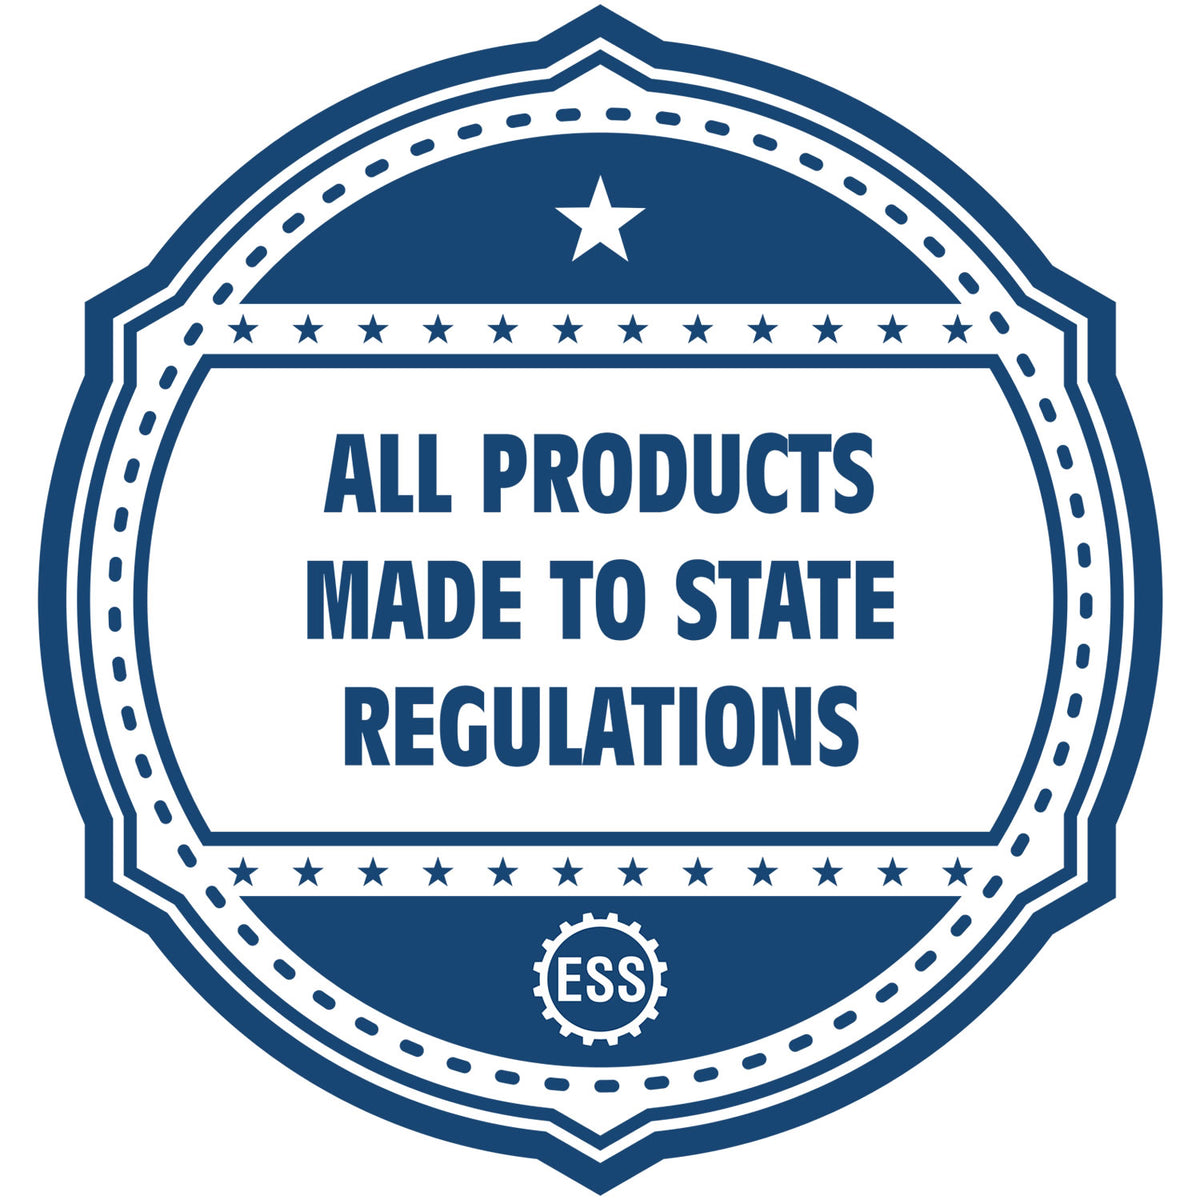 An icon or badge element for the New Mexico Desk Architect Embossing Seal showing that this product is made in compliance with state regulations.